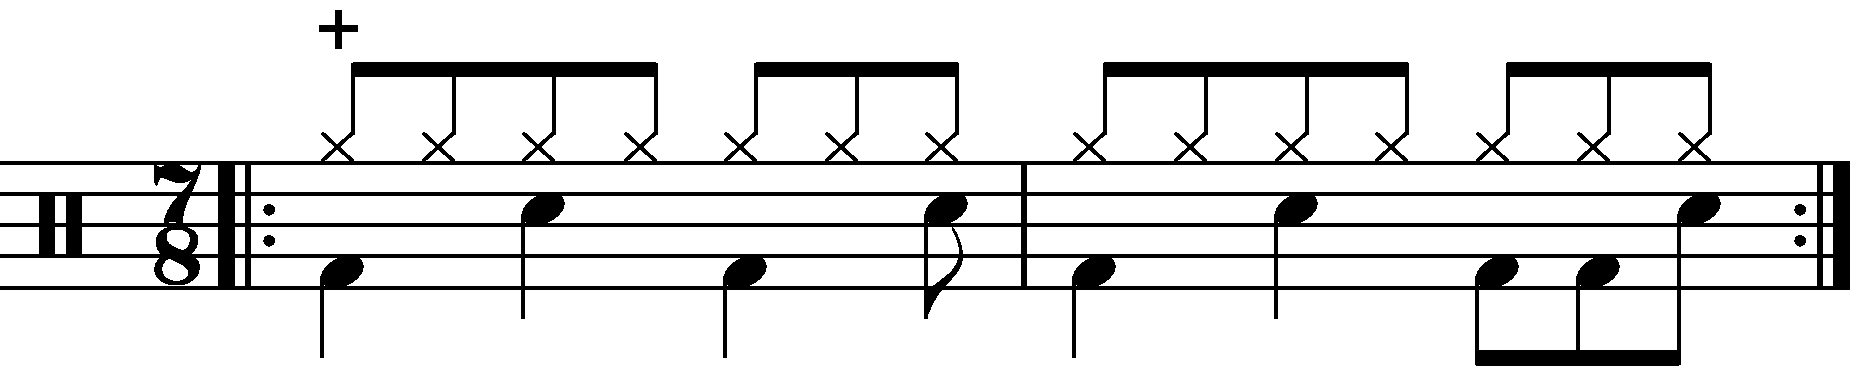 A two bar simple 7/8 groove